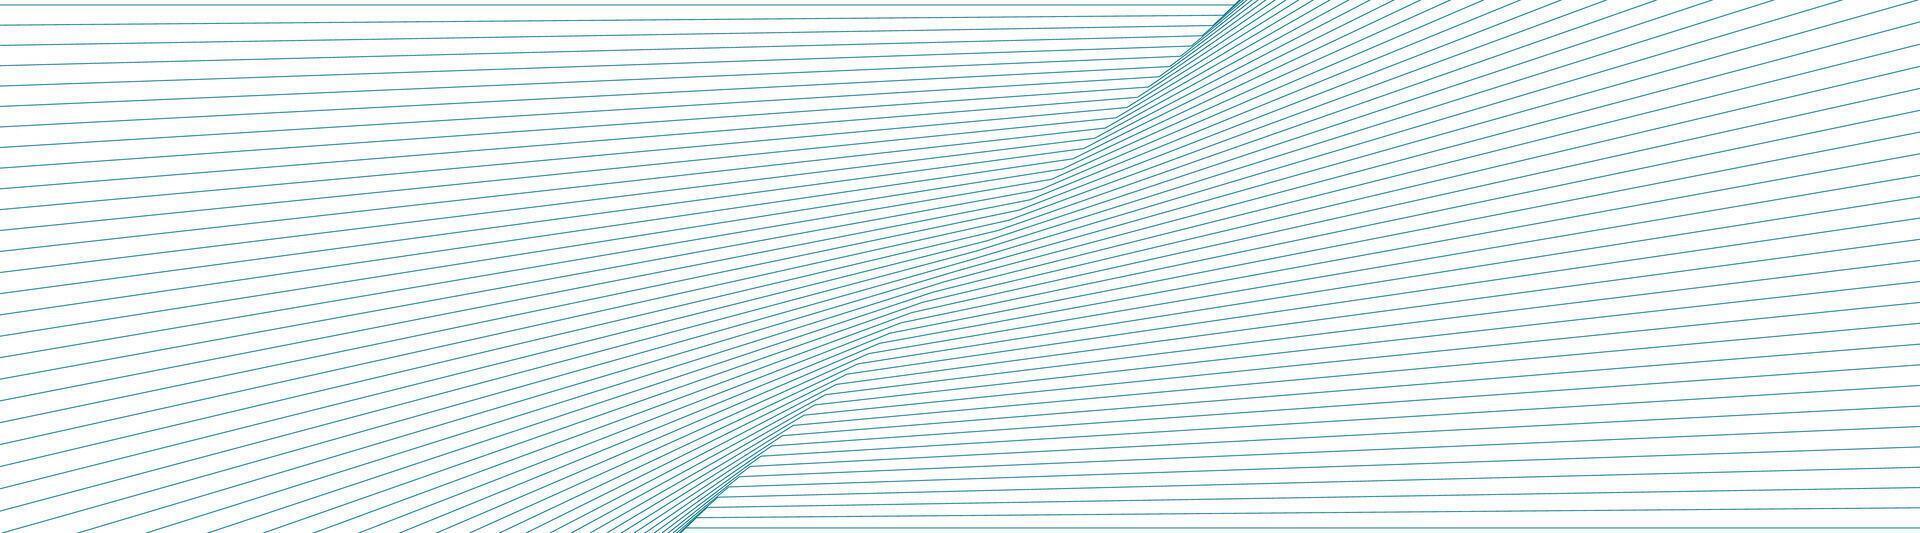 Bright blue curved lines abstract technology background vector